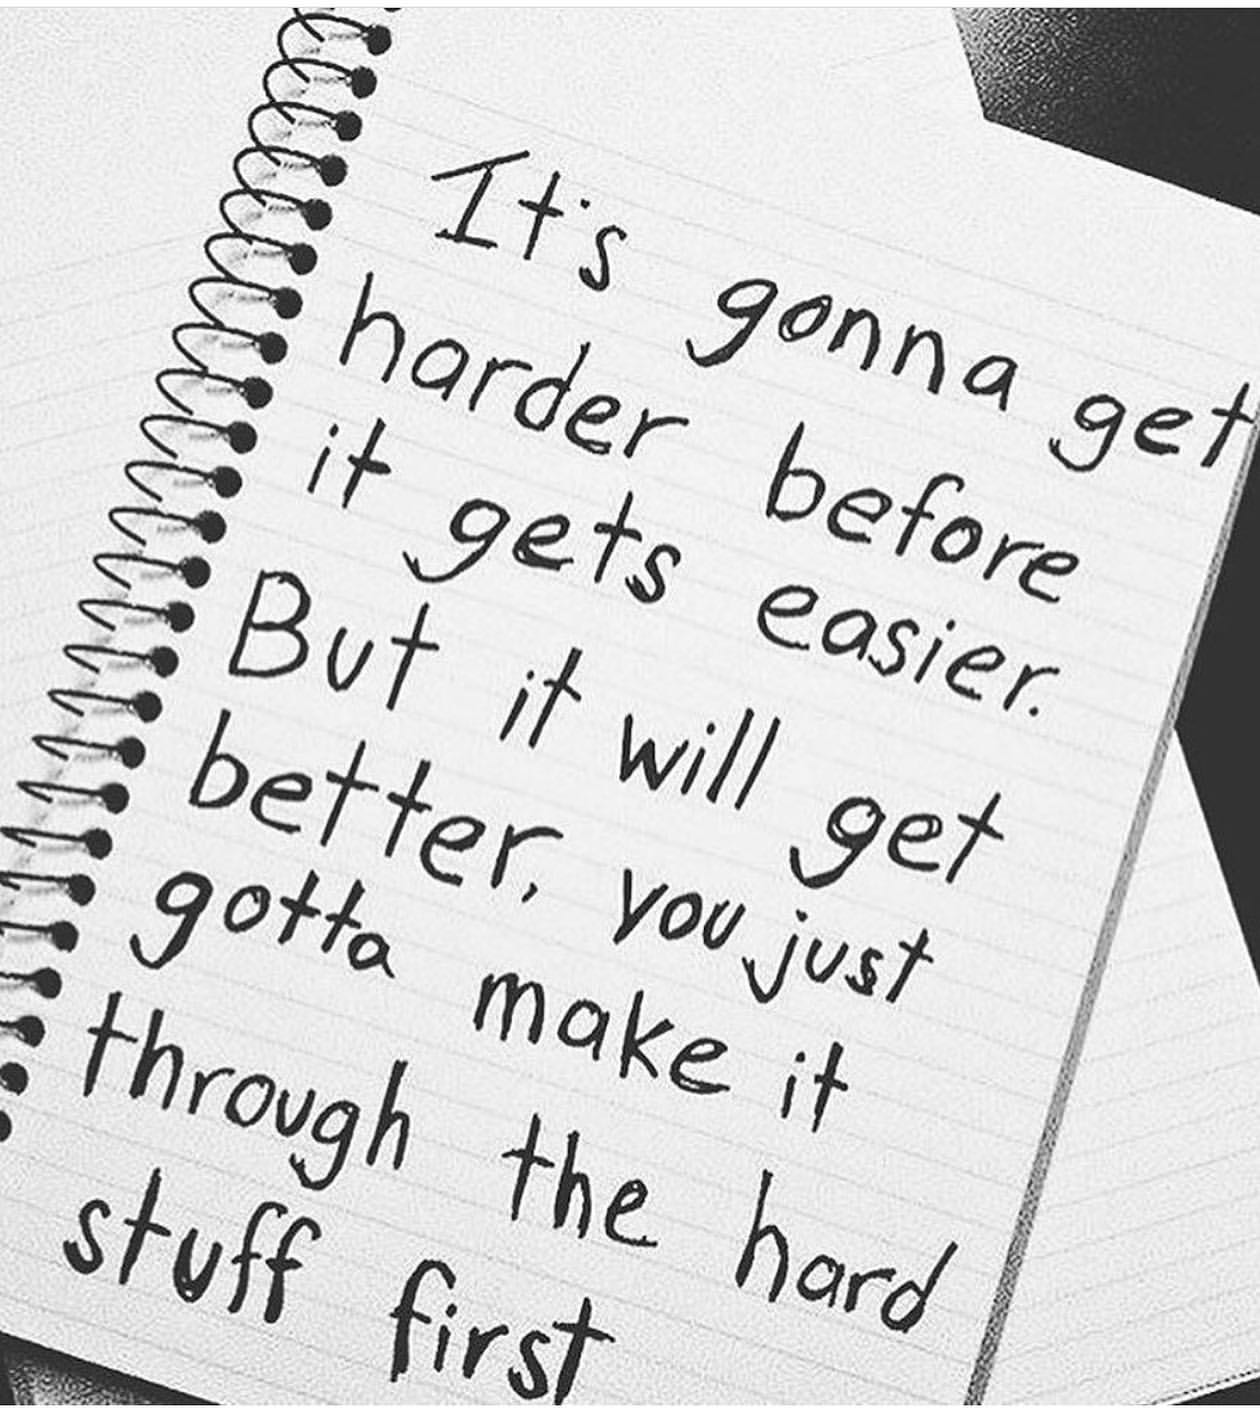 It' gonna get harder before it gets easier. But it will get better. You just gotta make it through the hard stuff first.